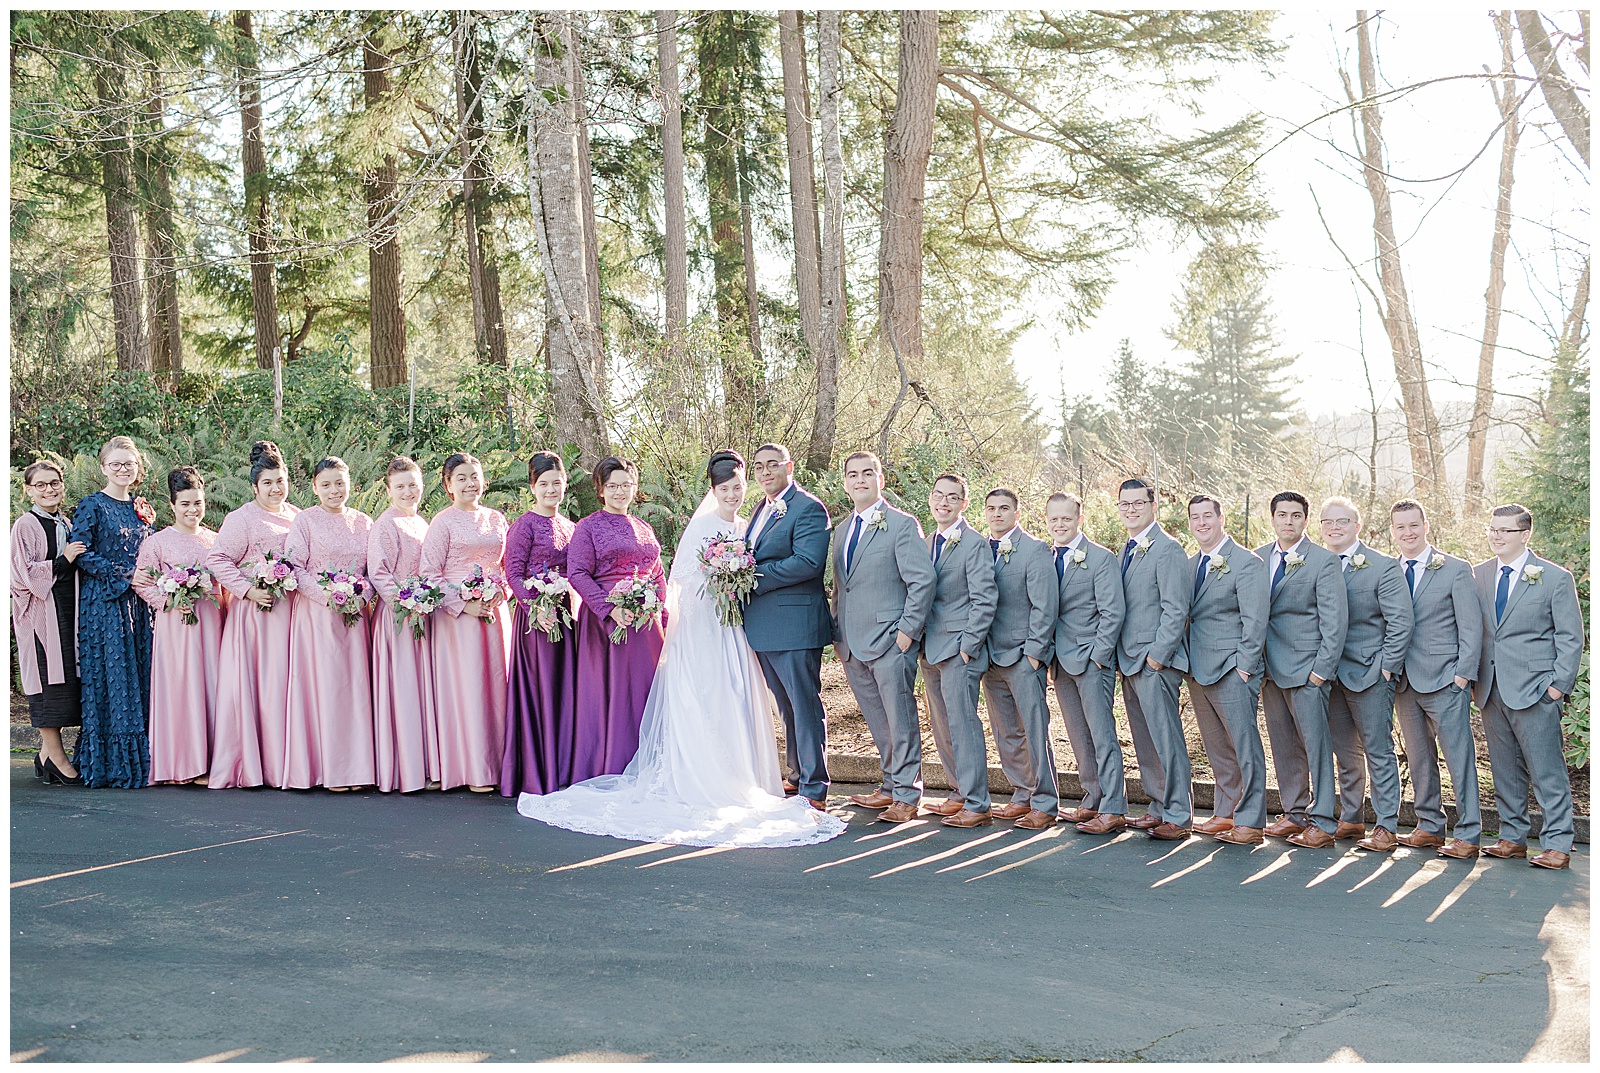 Bride and groom with bridal party in Seattle Washington wedding